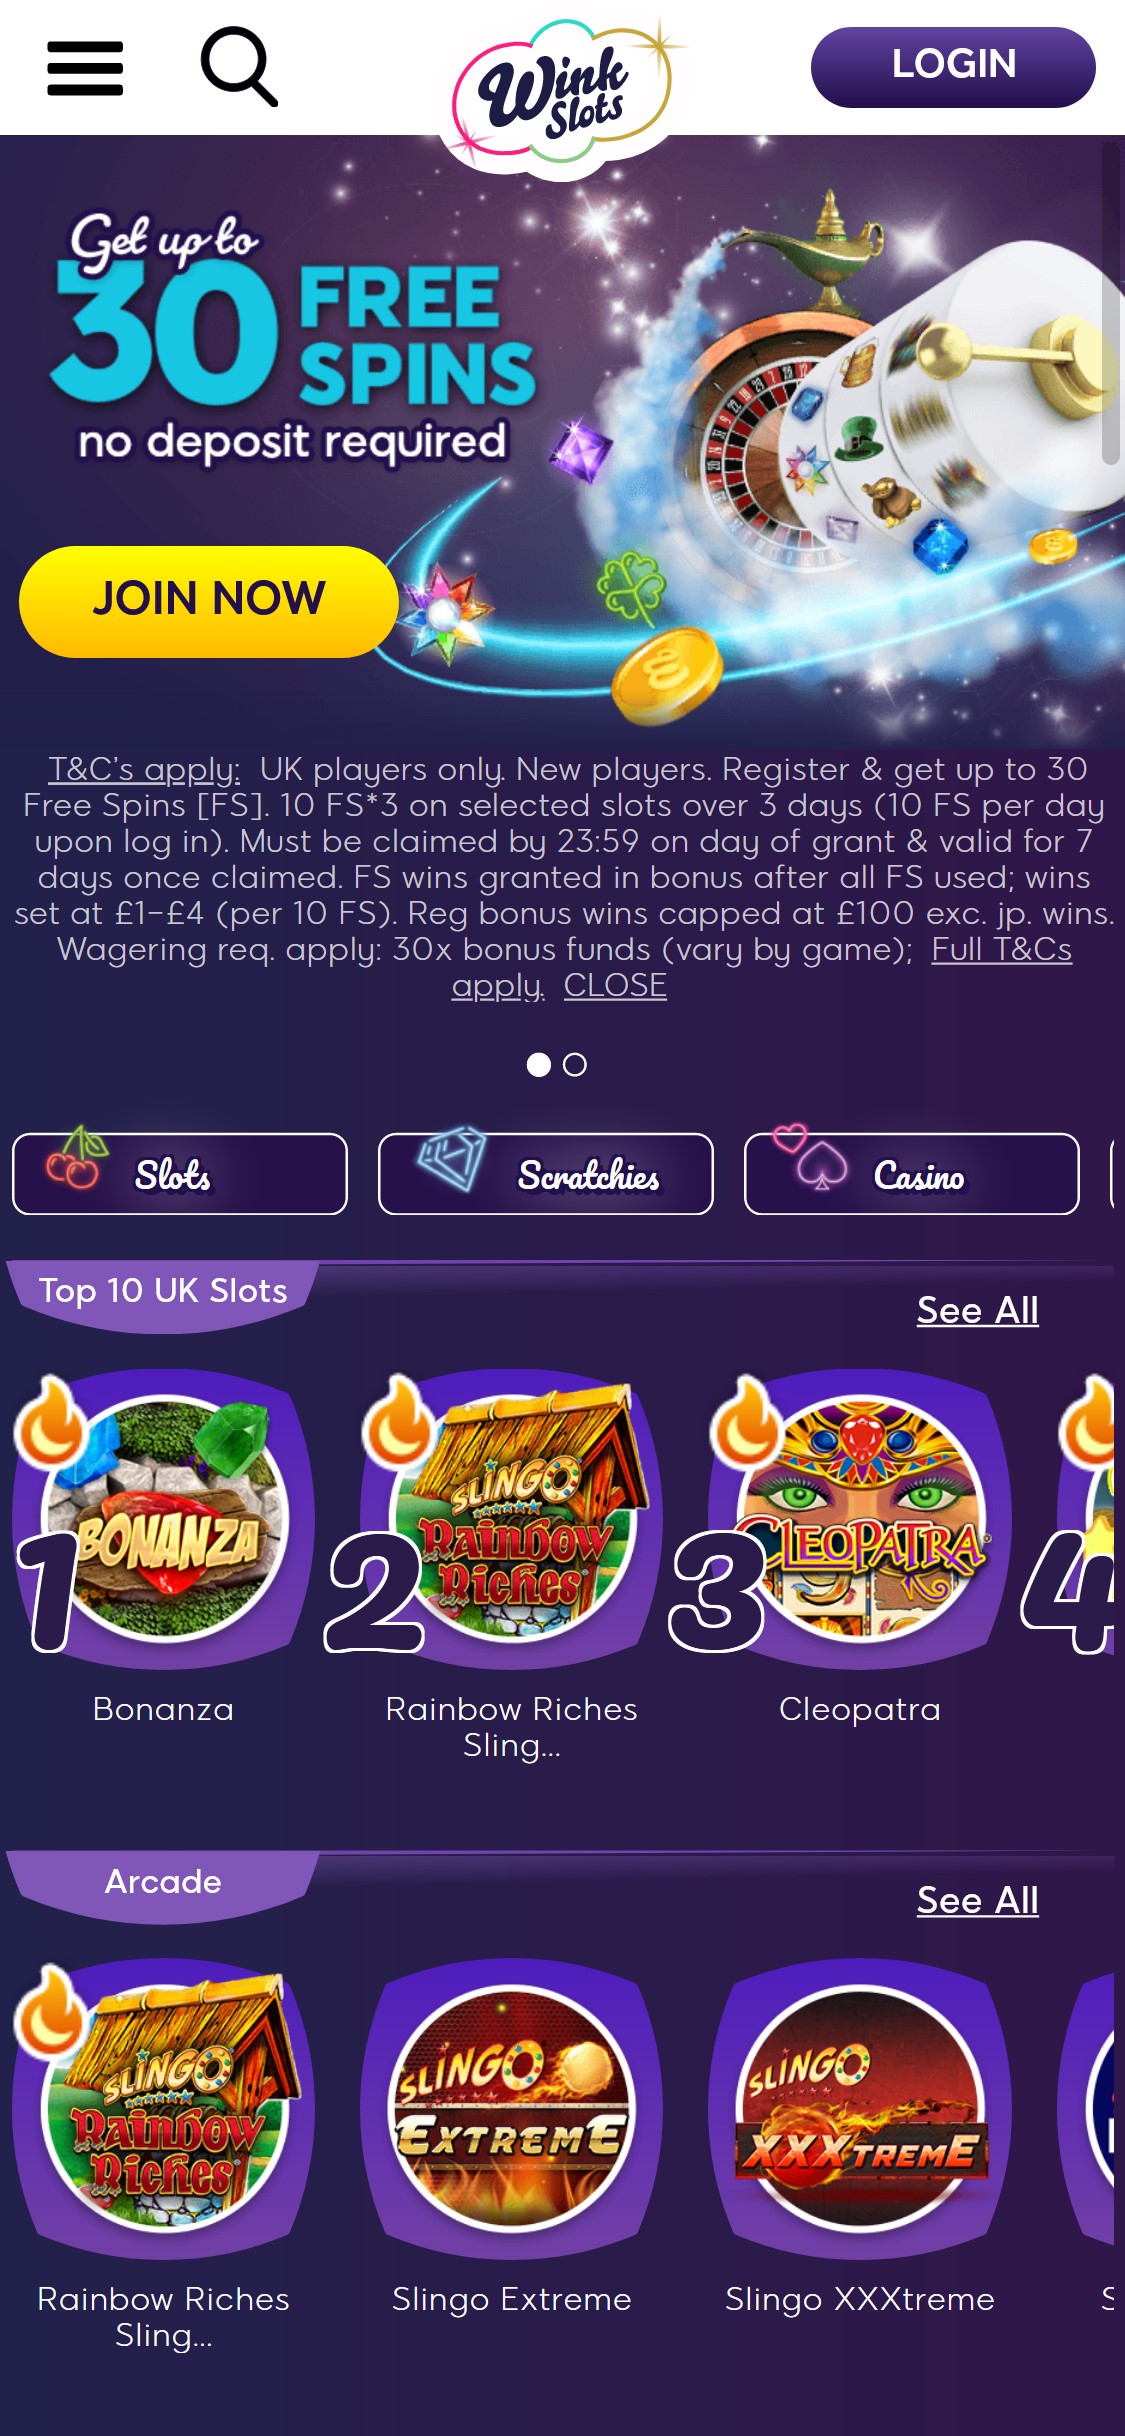 Wink Slots Casino Mobile Review